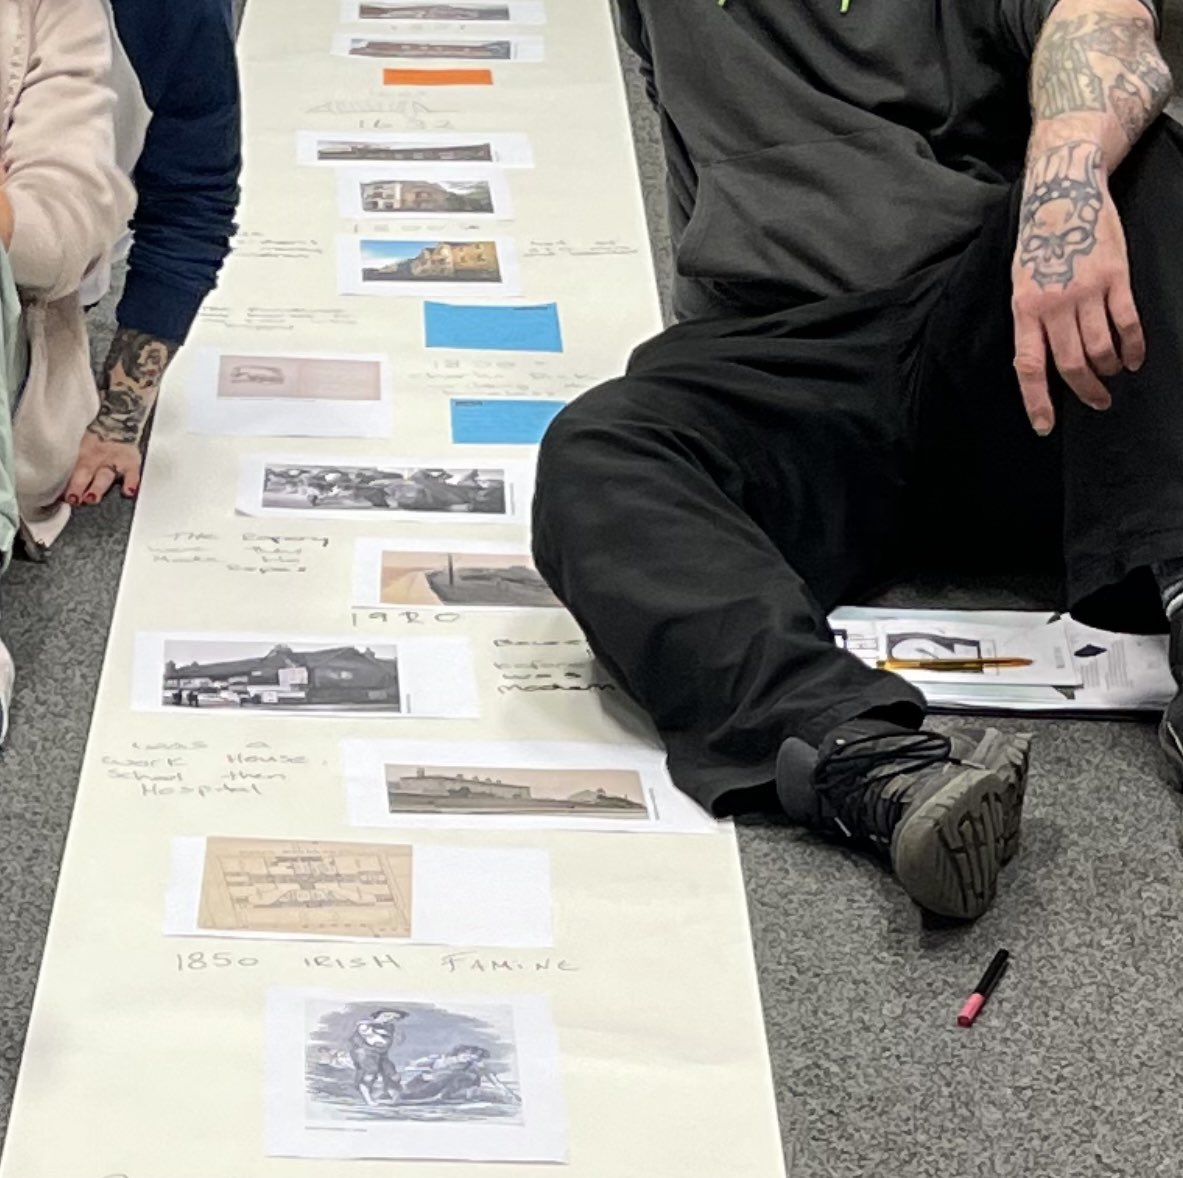 Thanks to all those who took part in our workshop today…co-creating a timeline of homelessness legislation from the ‘Statute of Cambridge 1388’ to the modern day. This will form part of our @HistoricEngland funded ‘Historical Perspectives of Homelessness’ exhibition in October